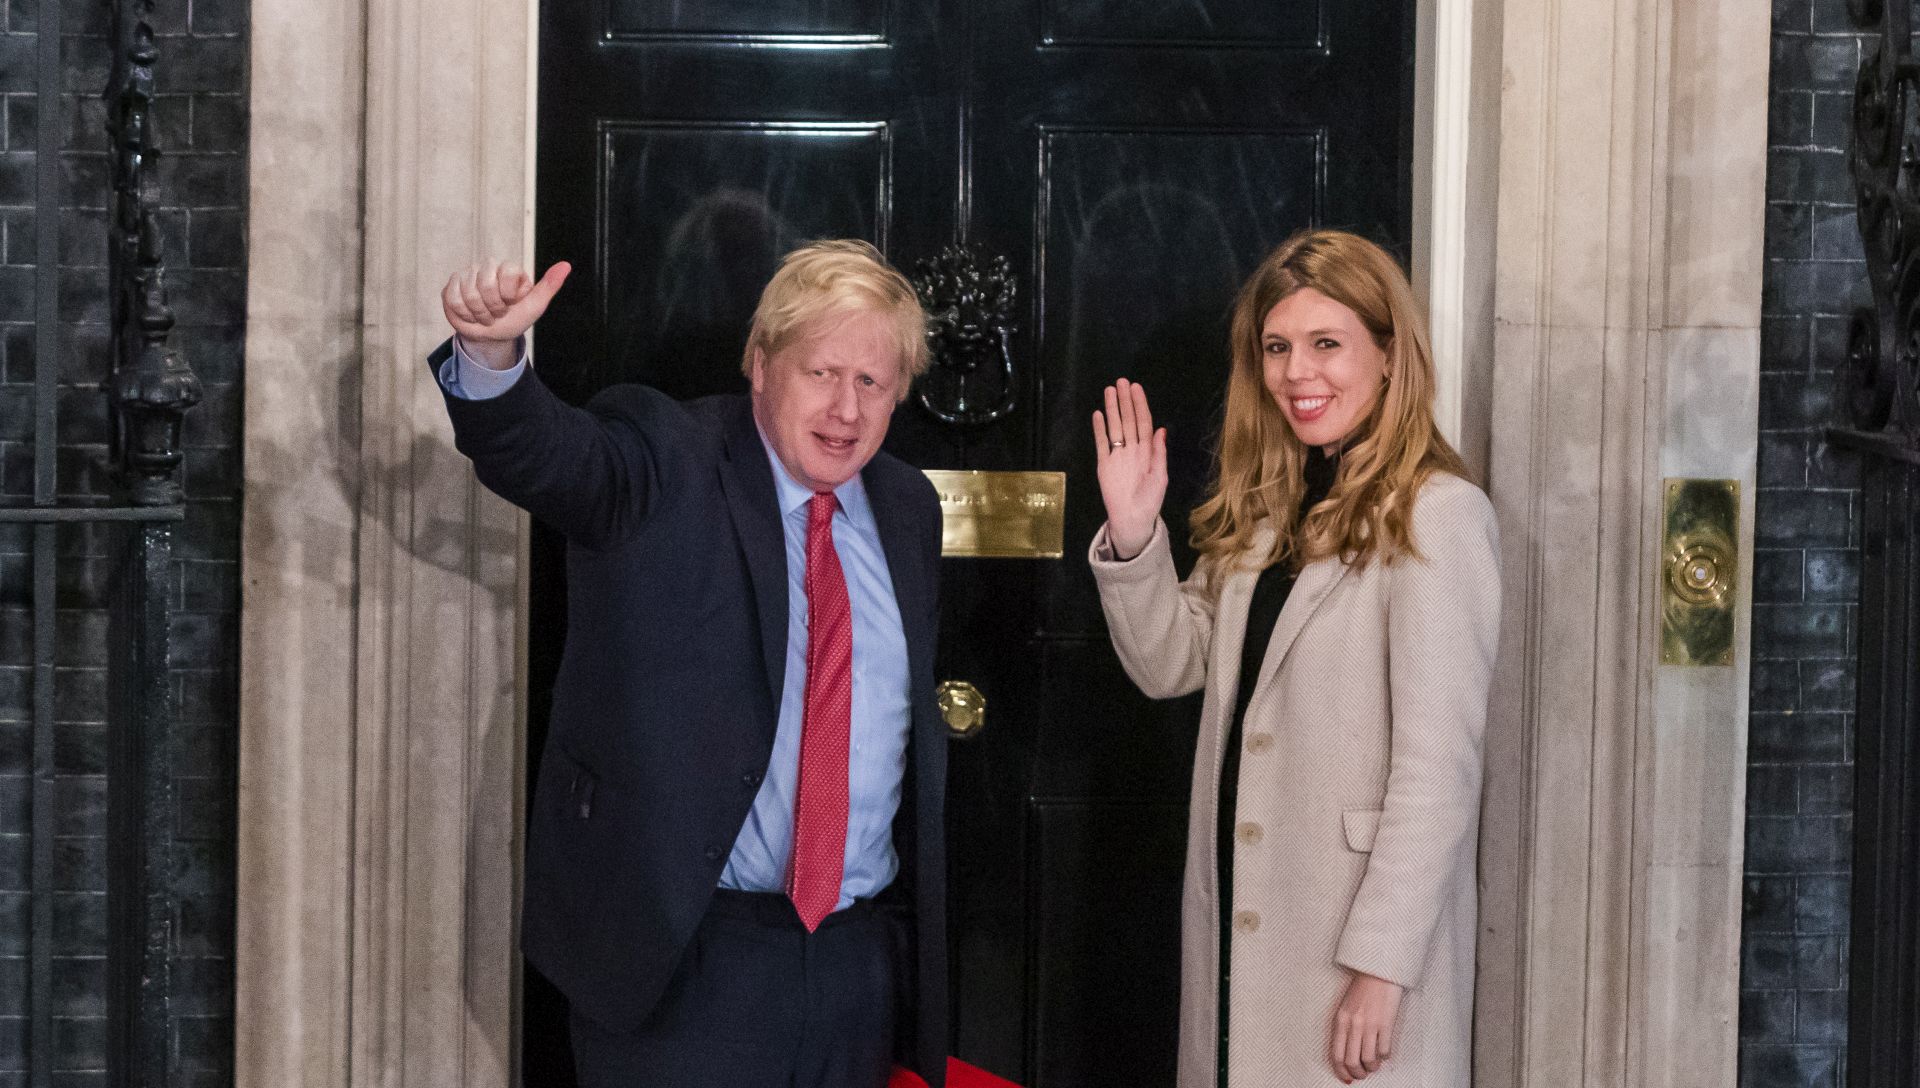 epa08067986 British Prime Minister Boris Johnson and his girlfriend Carrie Symonds arrive back in 10 Downing Street in London, Britain, 13 December 2019. Britons went to the polls for a general election on 12 December 2019, which the Conservative Party led by British Prime Minister Boris Johnson has won with an overall majority.  EPA/VICKIE FLORES